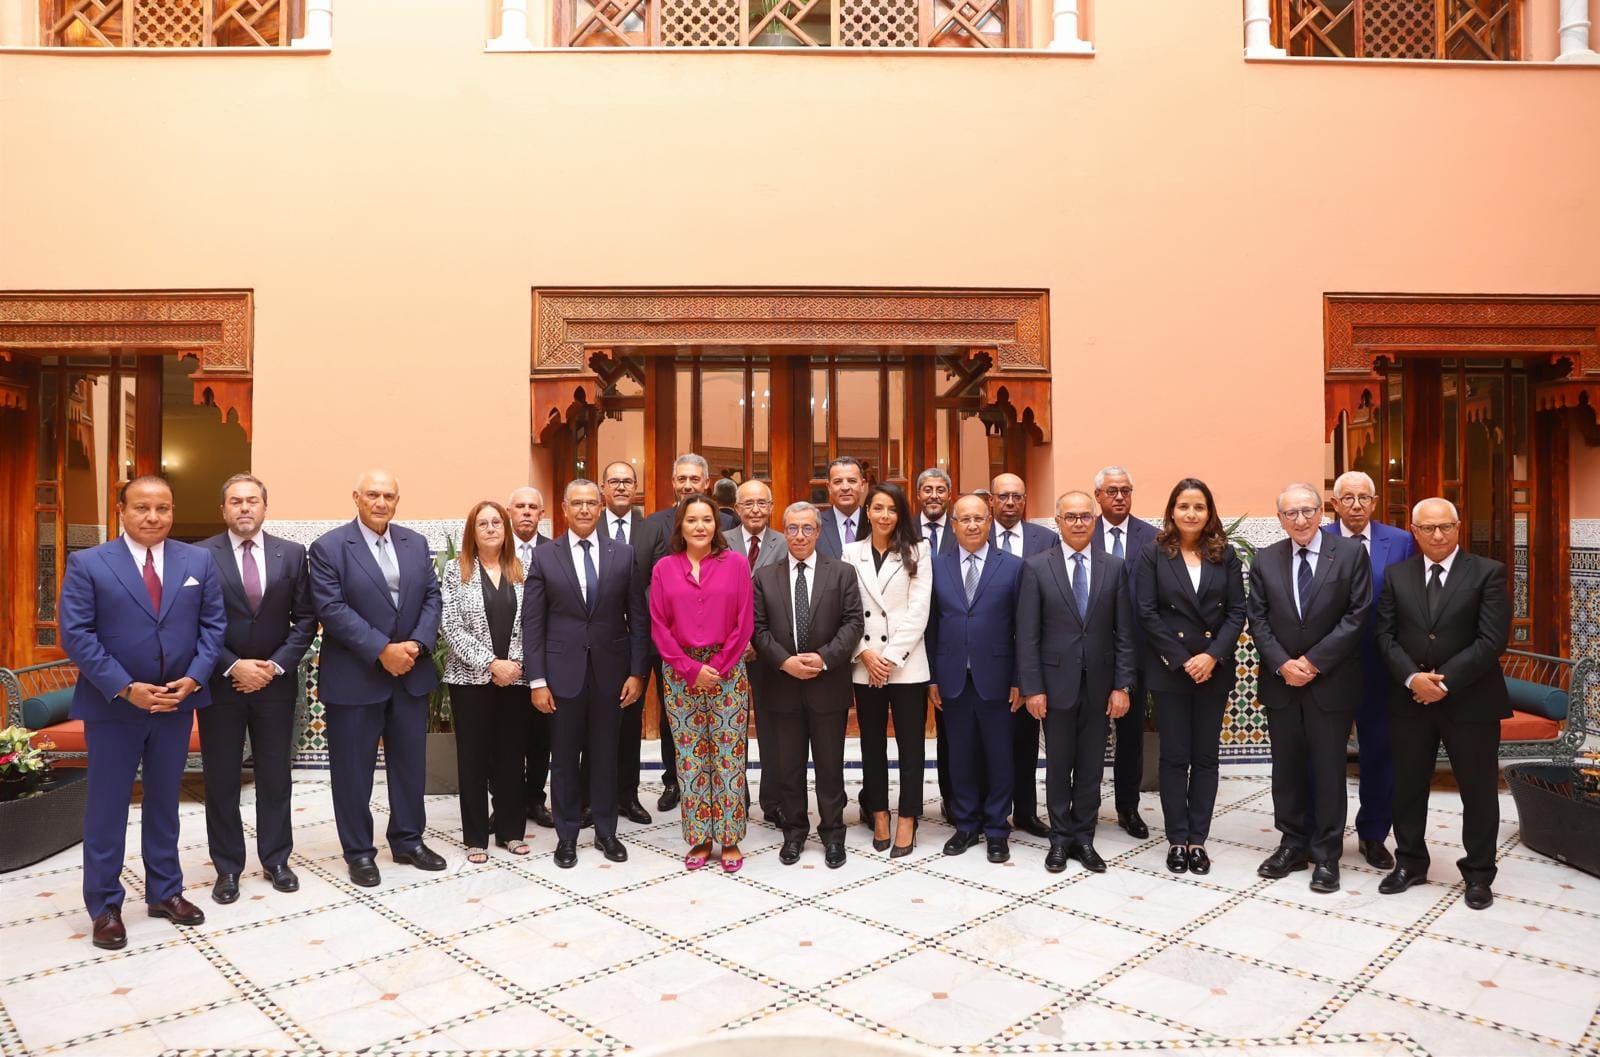 Marrakech – October 3, 2022 : <strong>HRH Princess Lalla Hasnaa</strong> Chairs Board of Directors of Mohammed VI Foundation for Protection of Environment in Marrakech